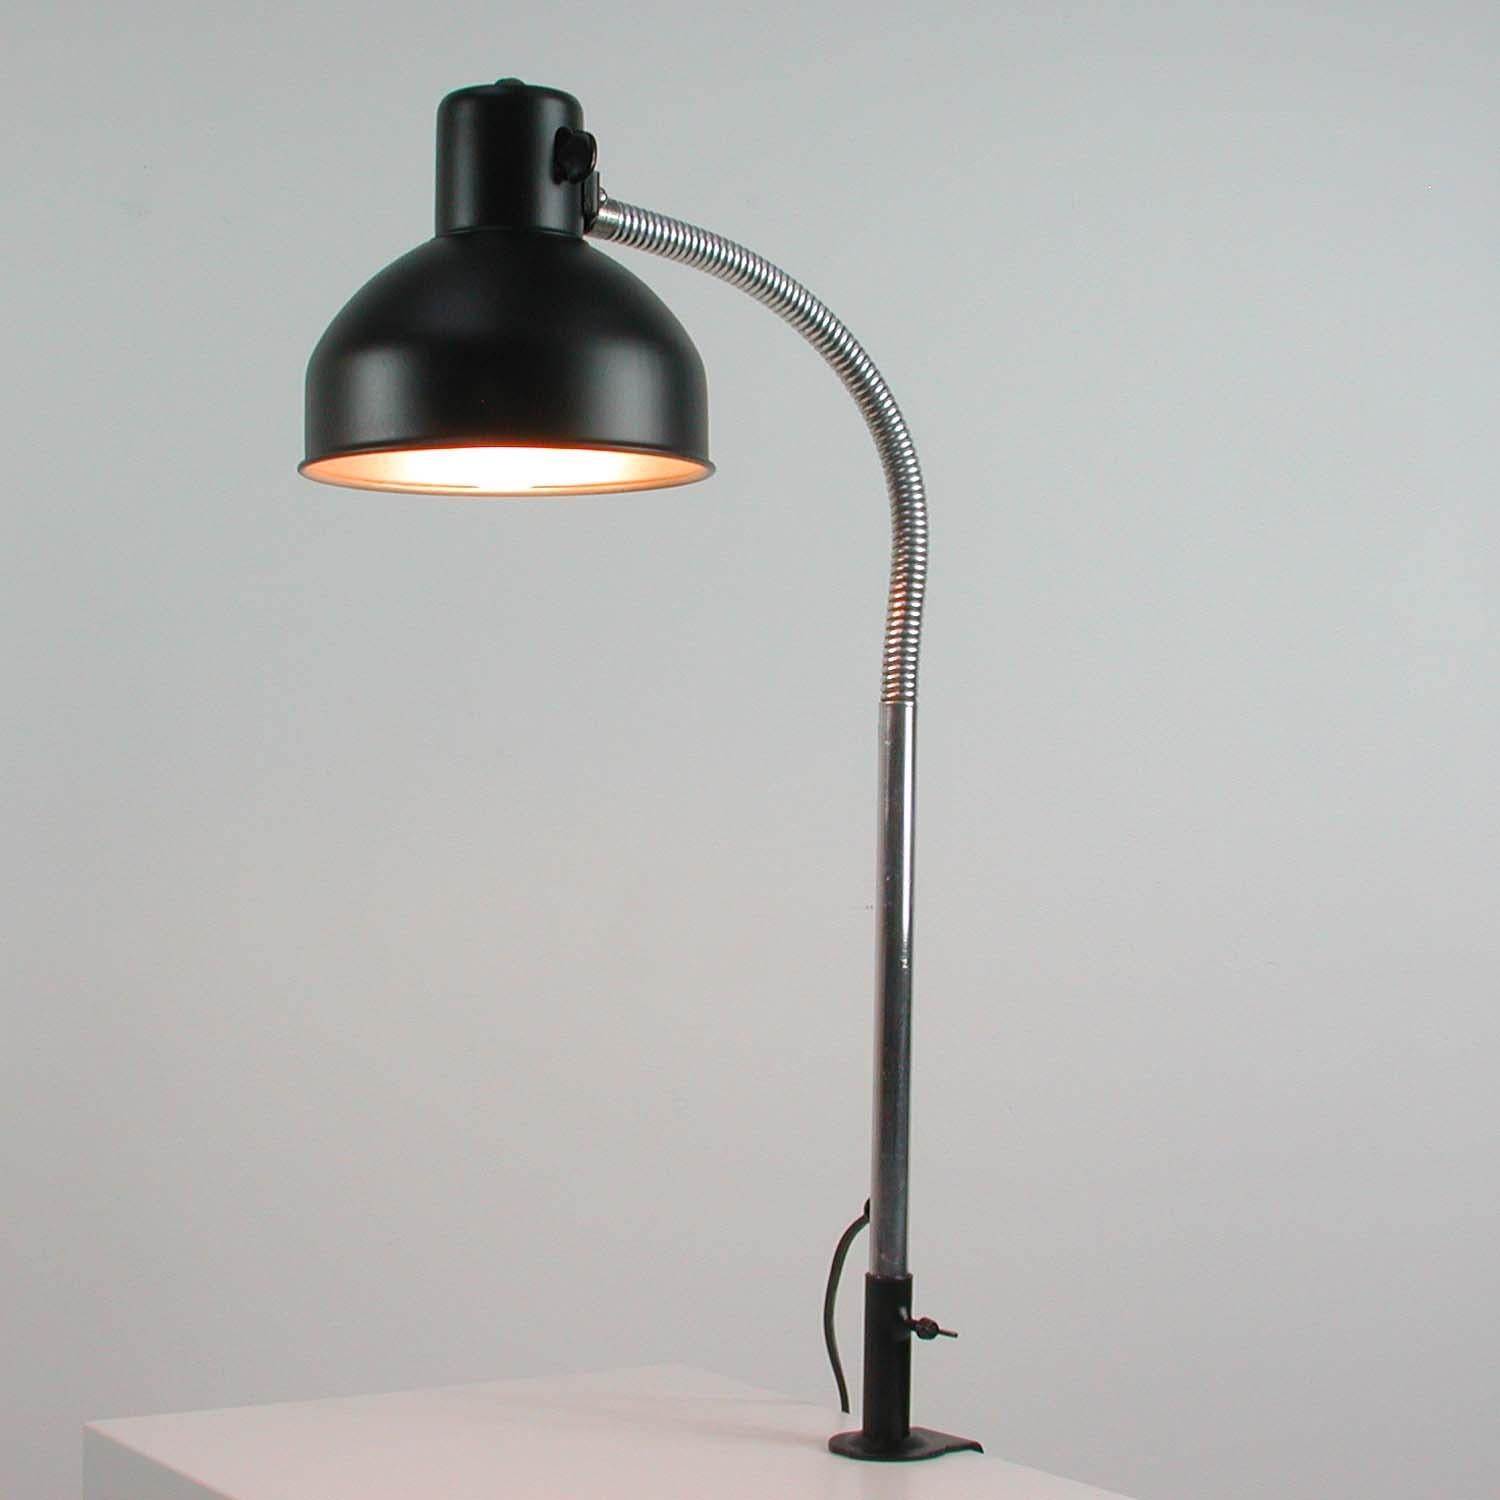 Vintage Industrial Work Lamp by Albert and Brause, Germany, 1950s For Sale 4